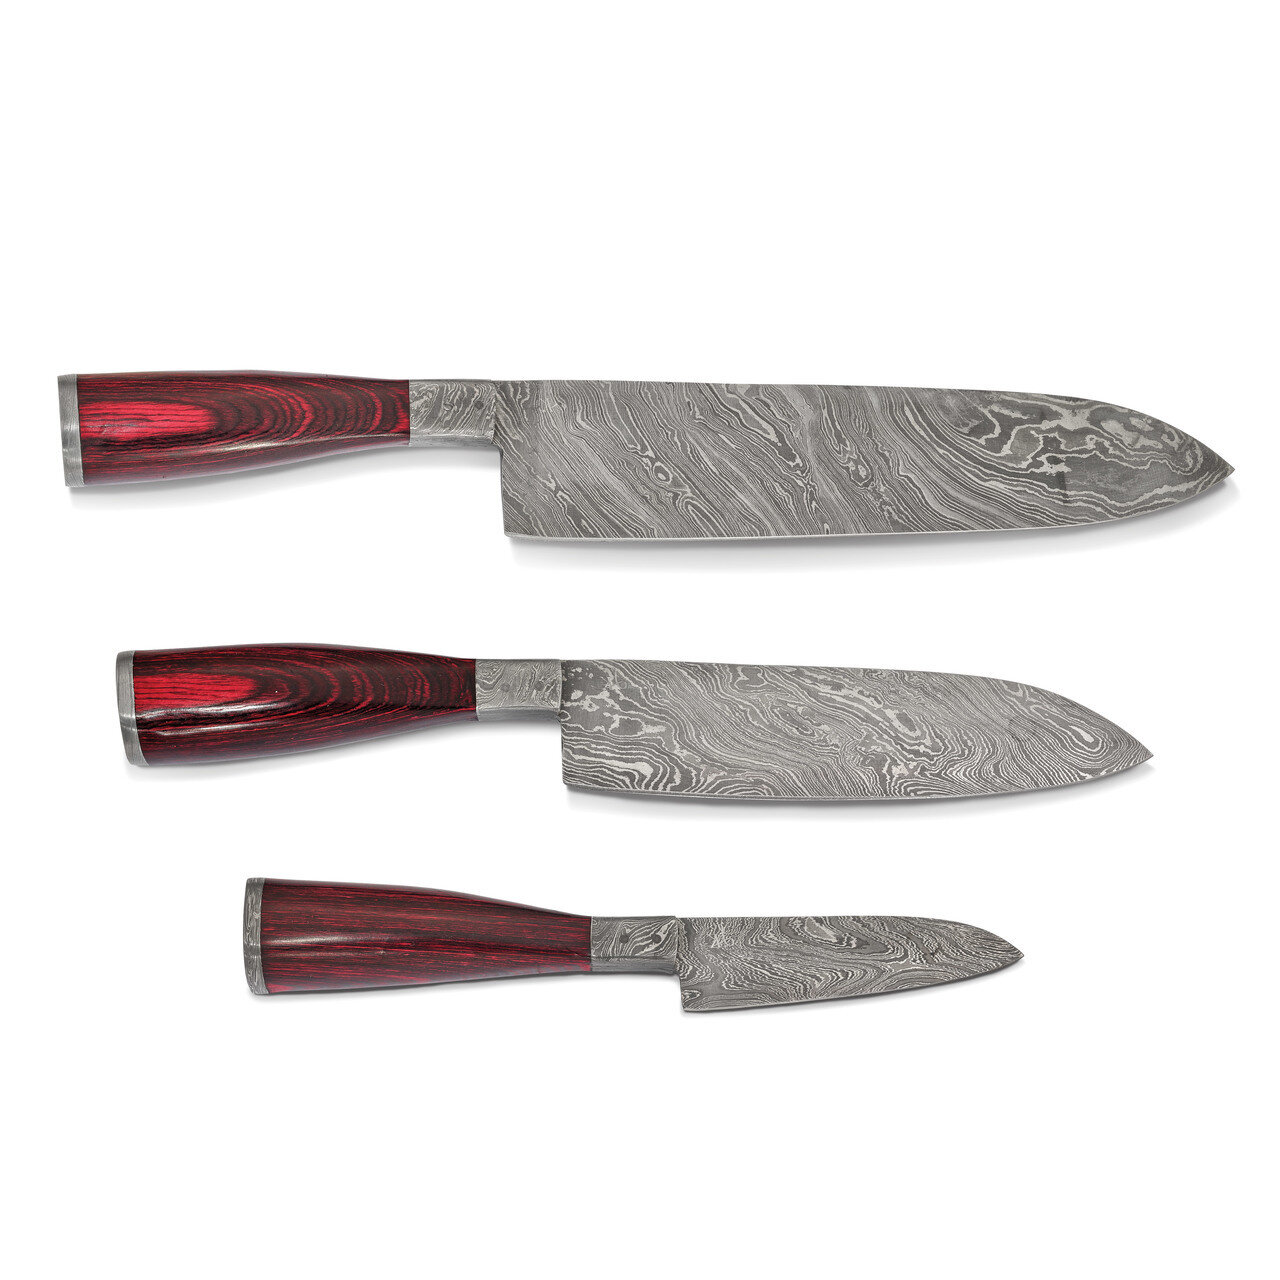 Set of 3, Damascus Steel 256 Layer Fixed Blade Pakka Wood Handle Knives by Jere